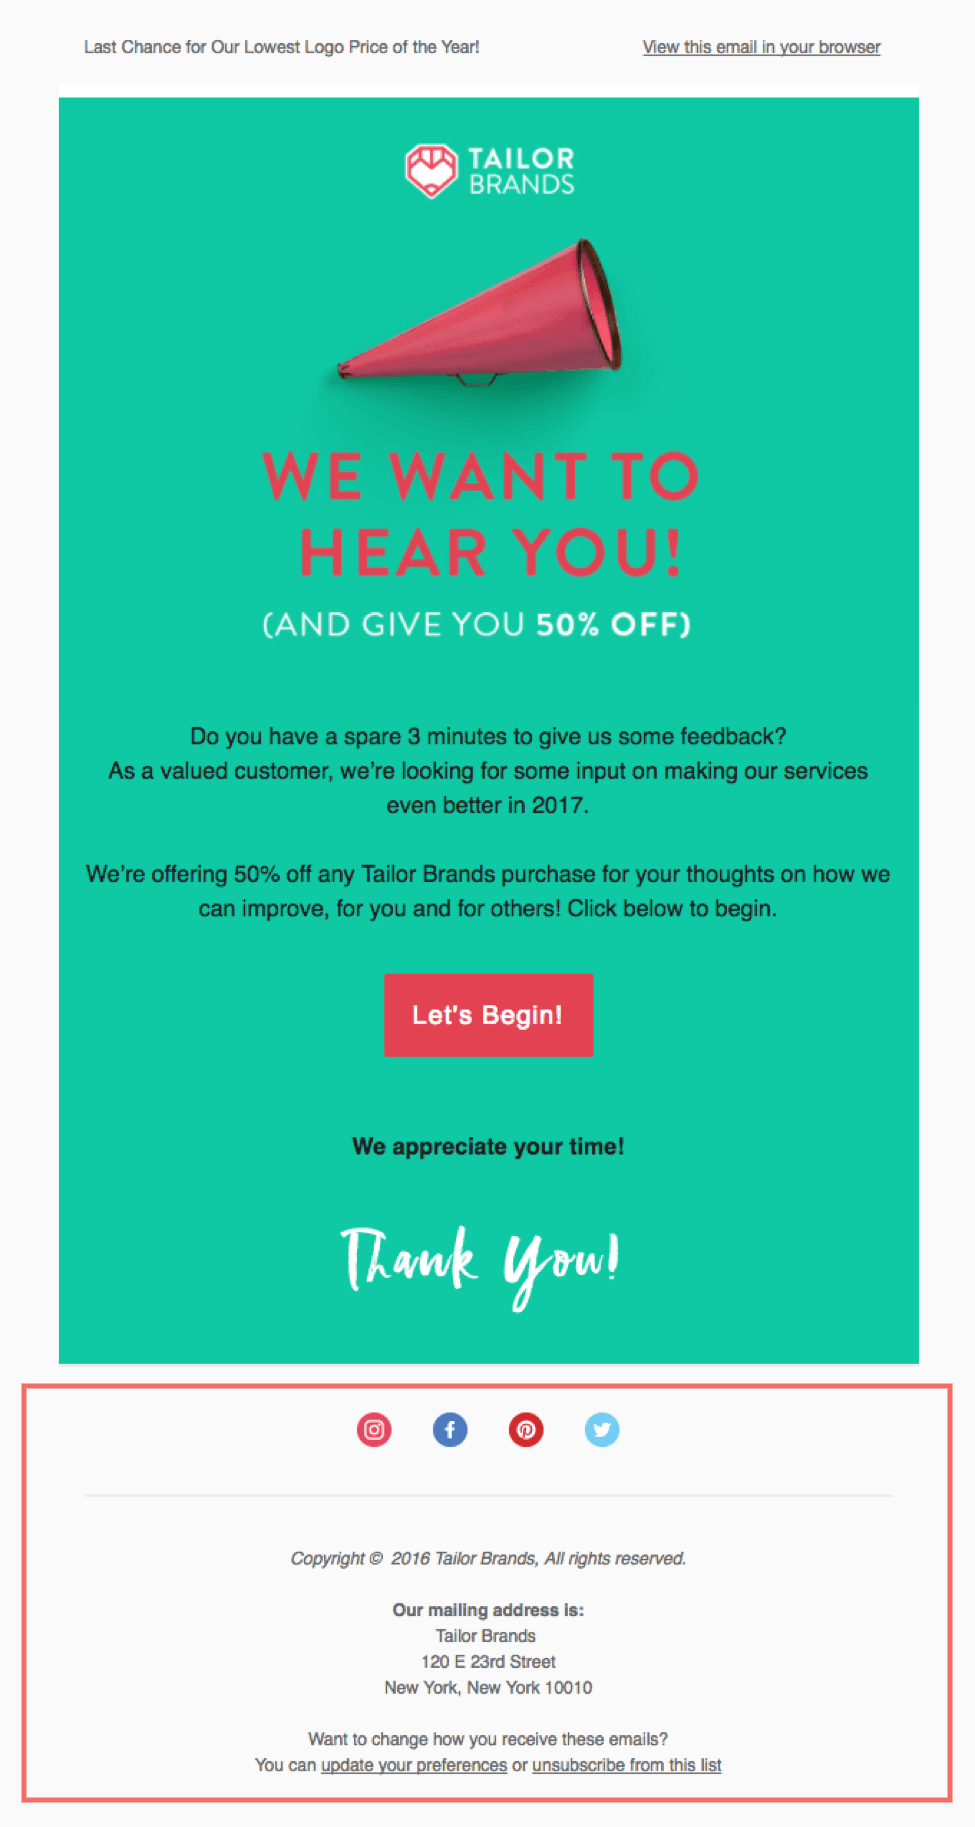 An email footer example in the Tailor brand's email newsletter